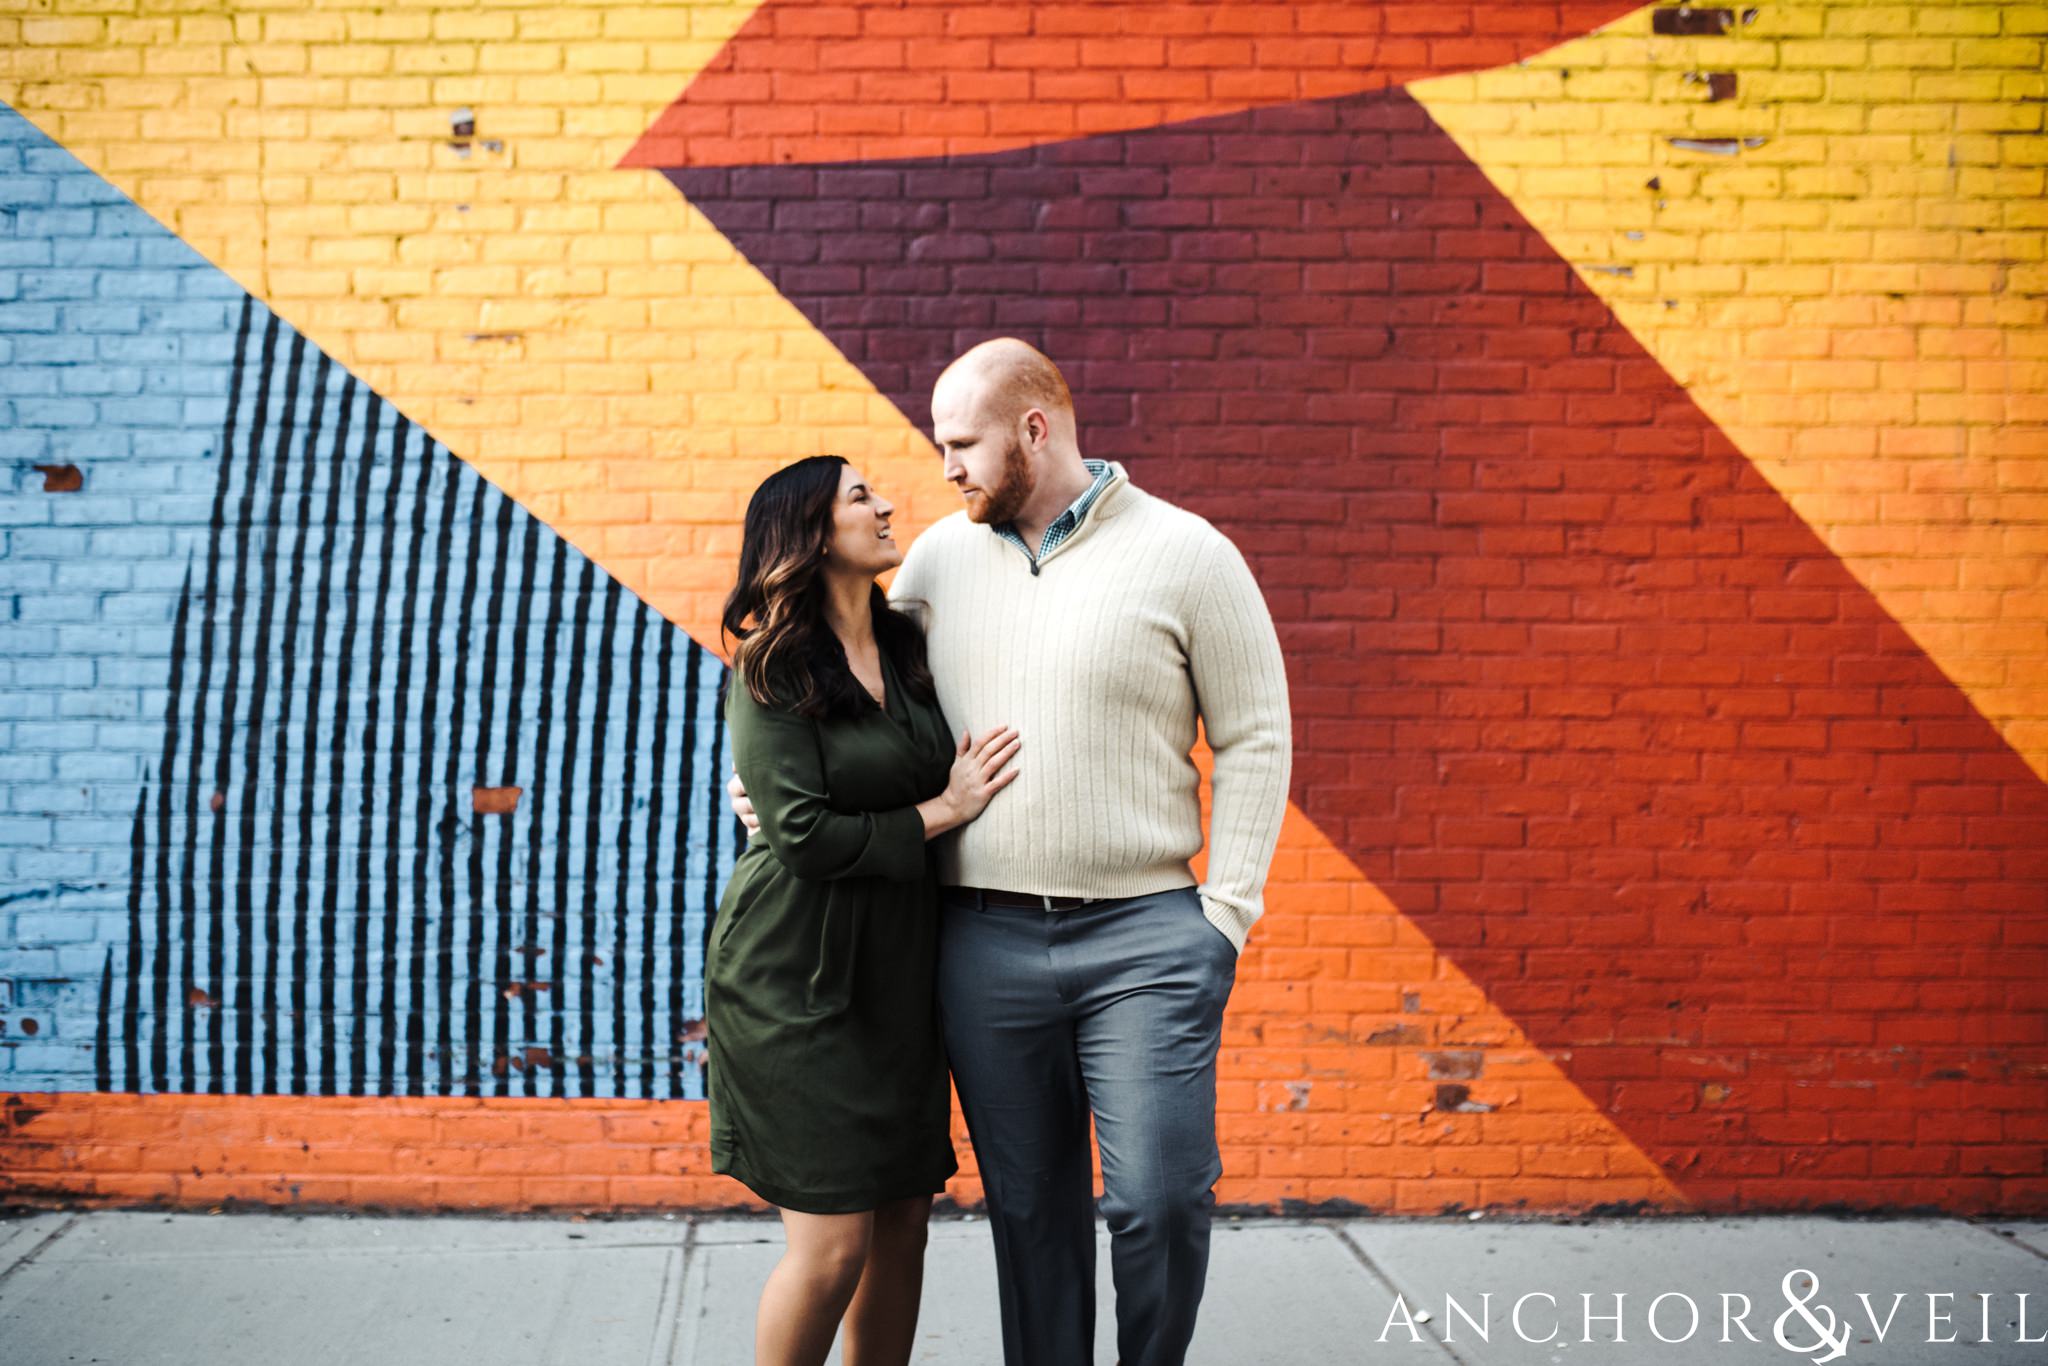 in front of the art During their Dumbo Brooklyn New York engagement session